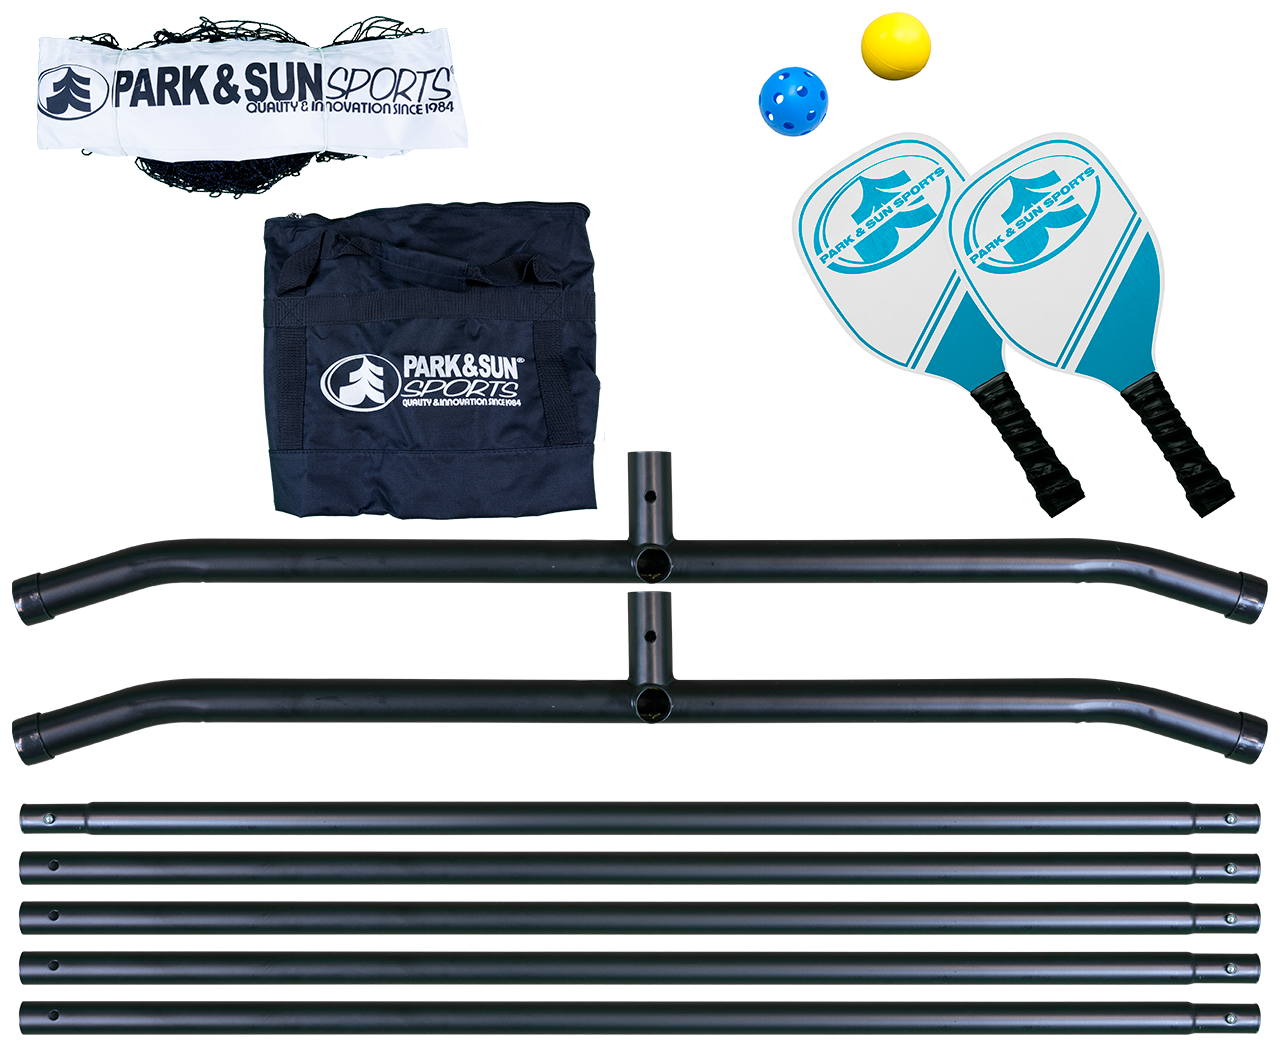 Park and Sports Pickleball Accessories Layout